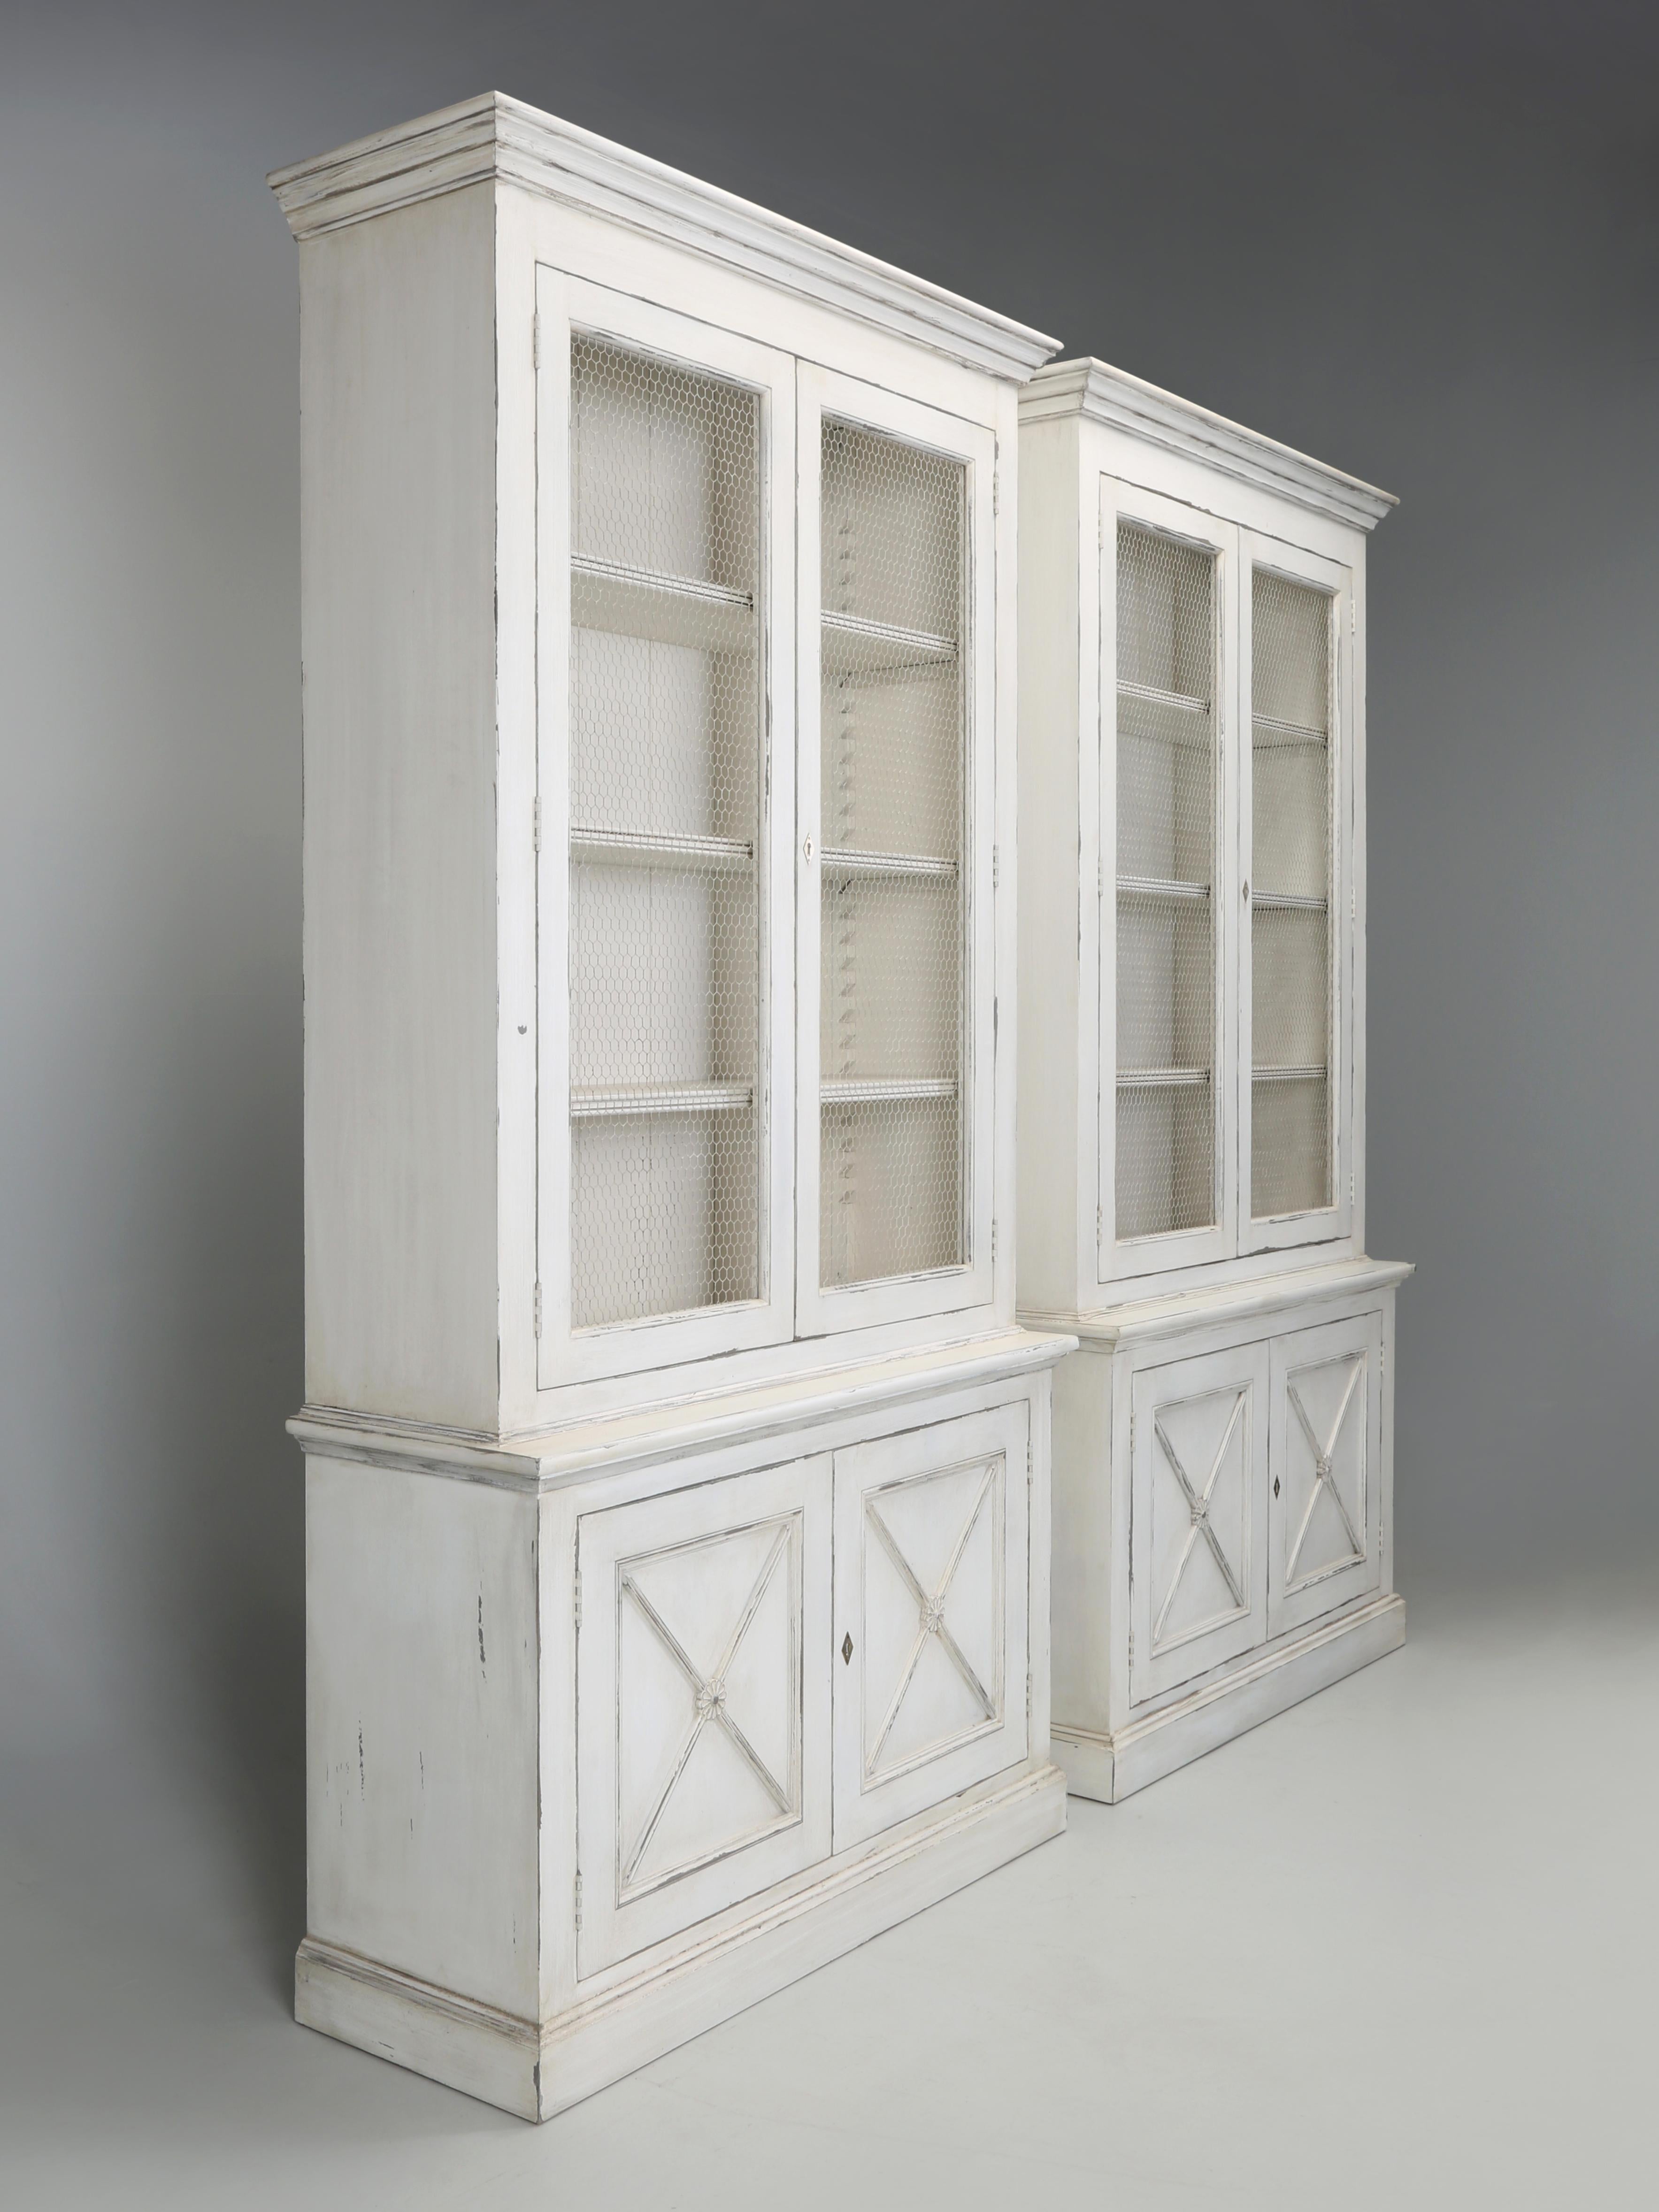 Pair of French Directoire Inspired Bookcases, China Cabinets or Display Cabinets made in house by Old Plank. Roughly 30-years ago we purchased in France a similar Directoire style Bookcase and sent it to England to be reproduced and for many years